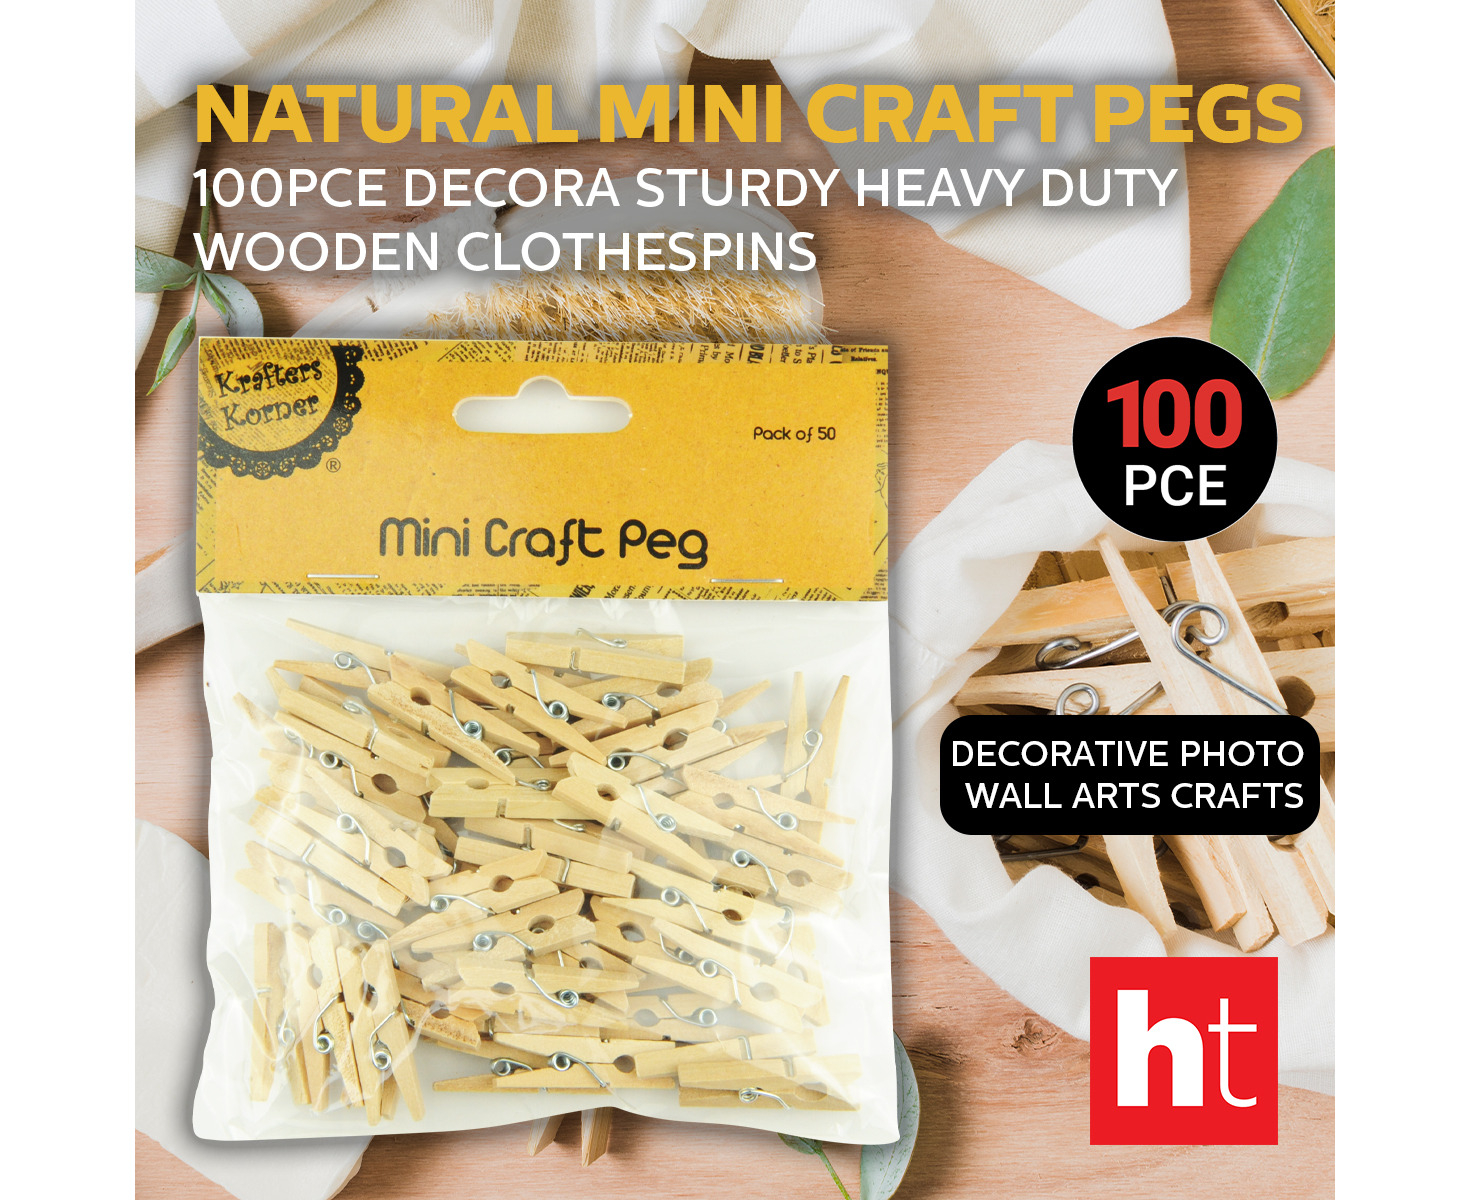 2 x pack of 50 Pack of 100 wooden clothes pegs 